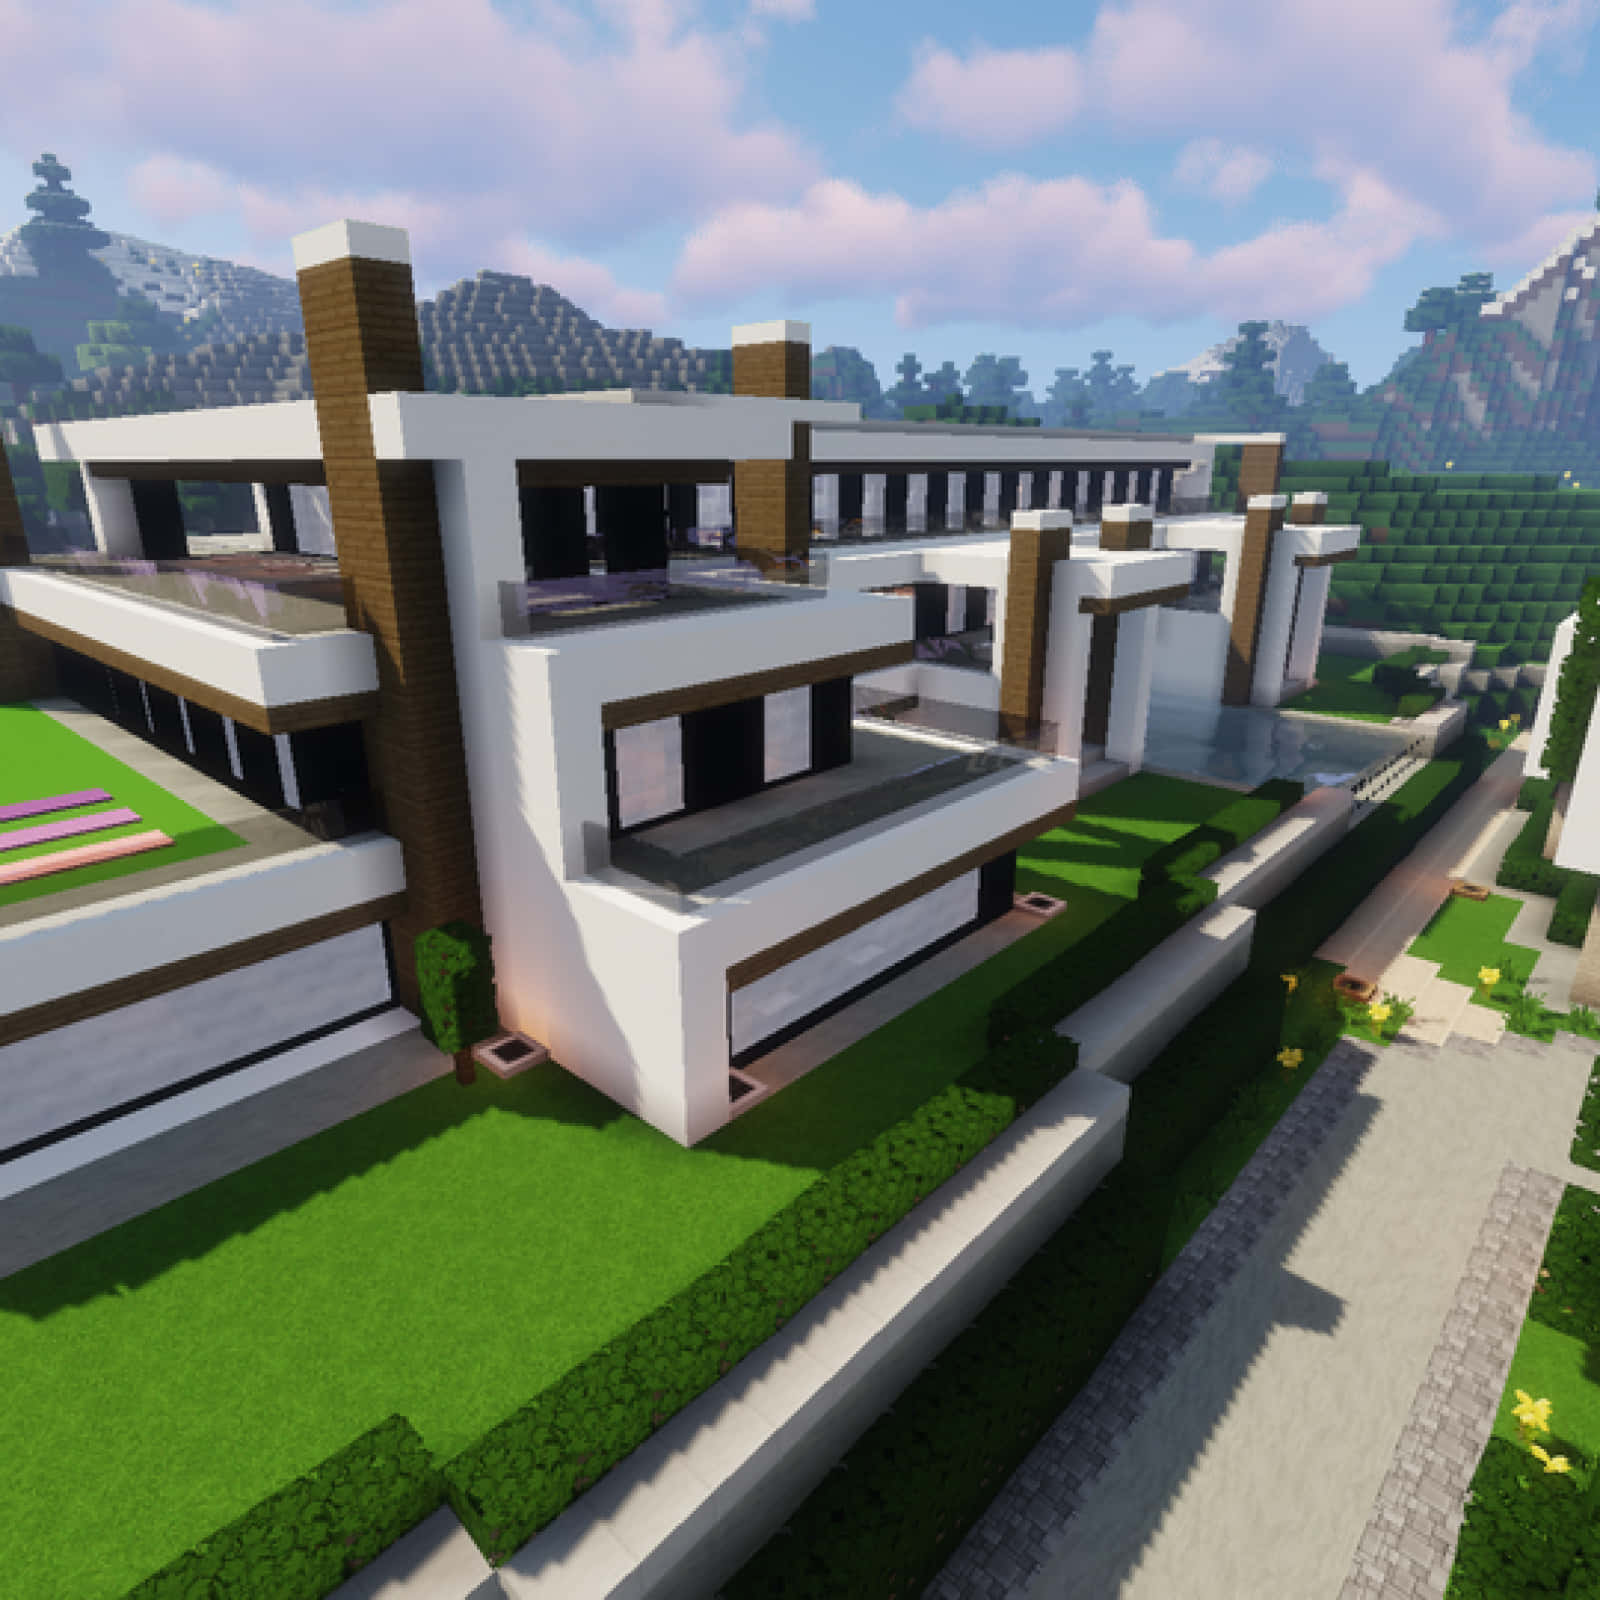 Create your own unique Minecraft house